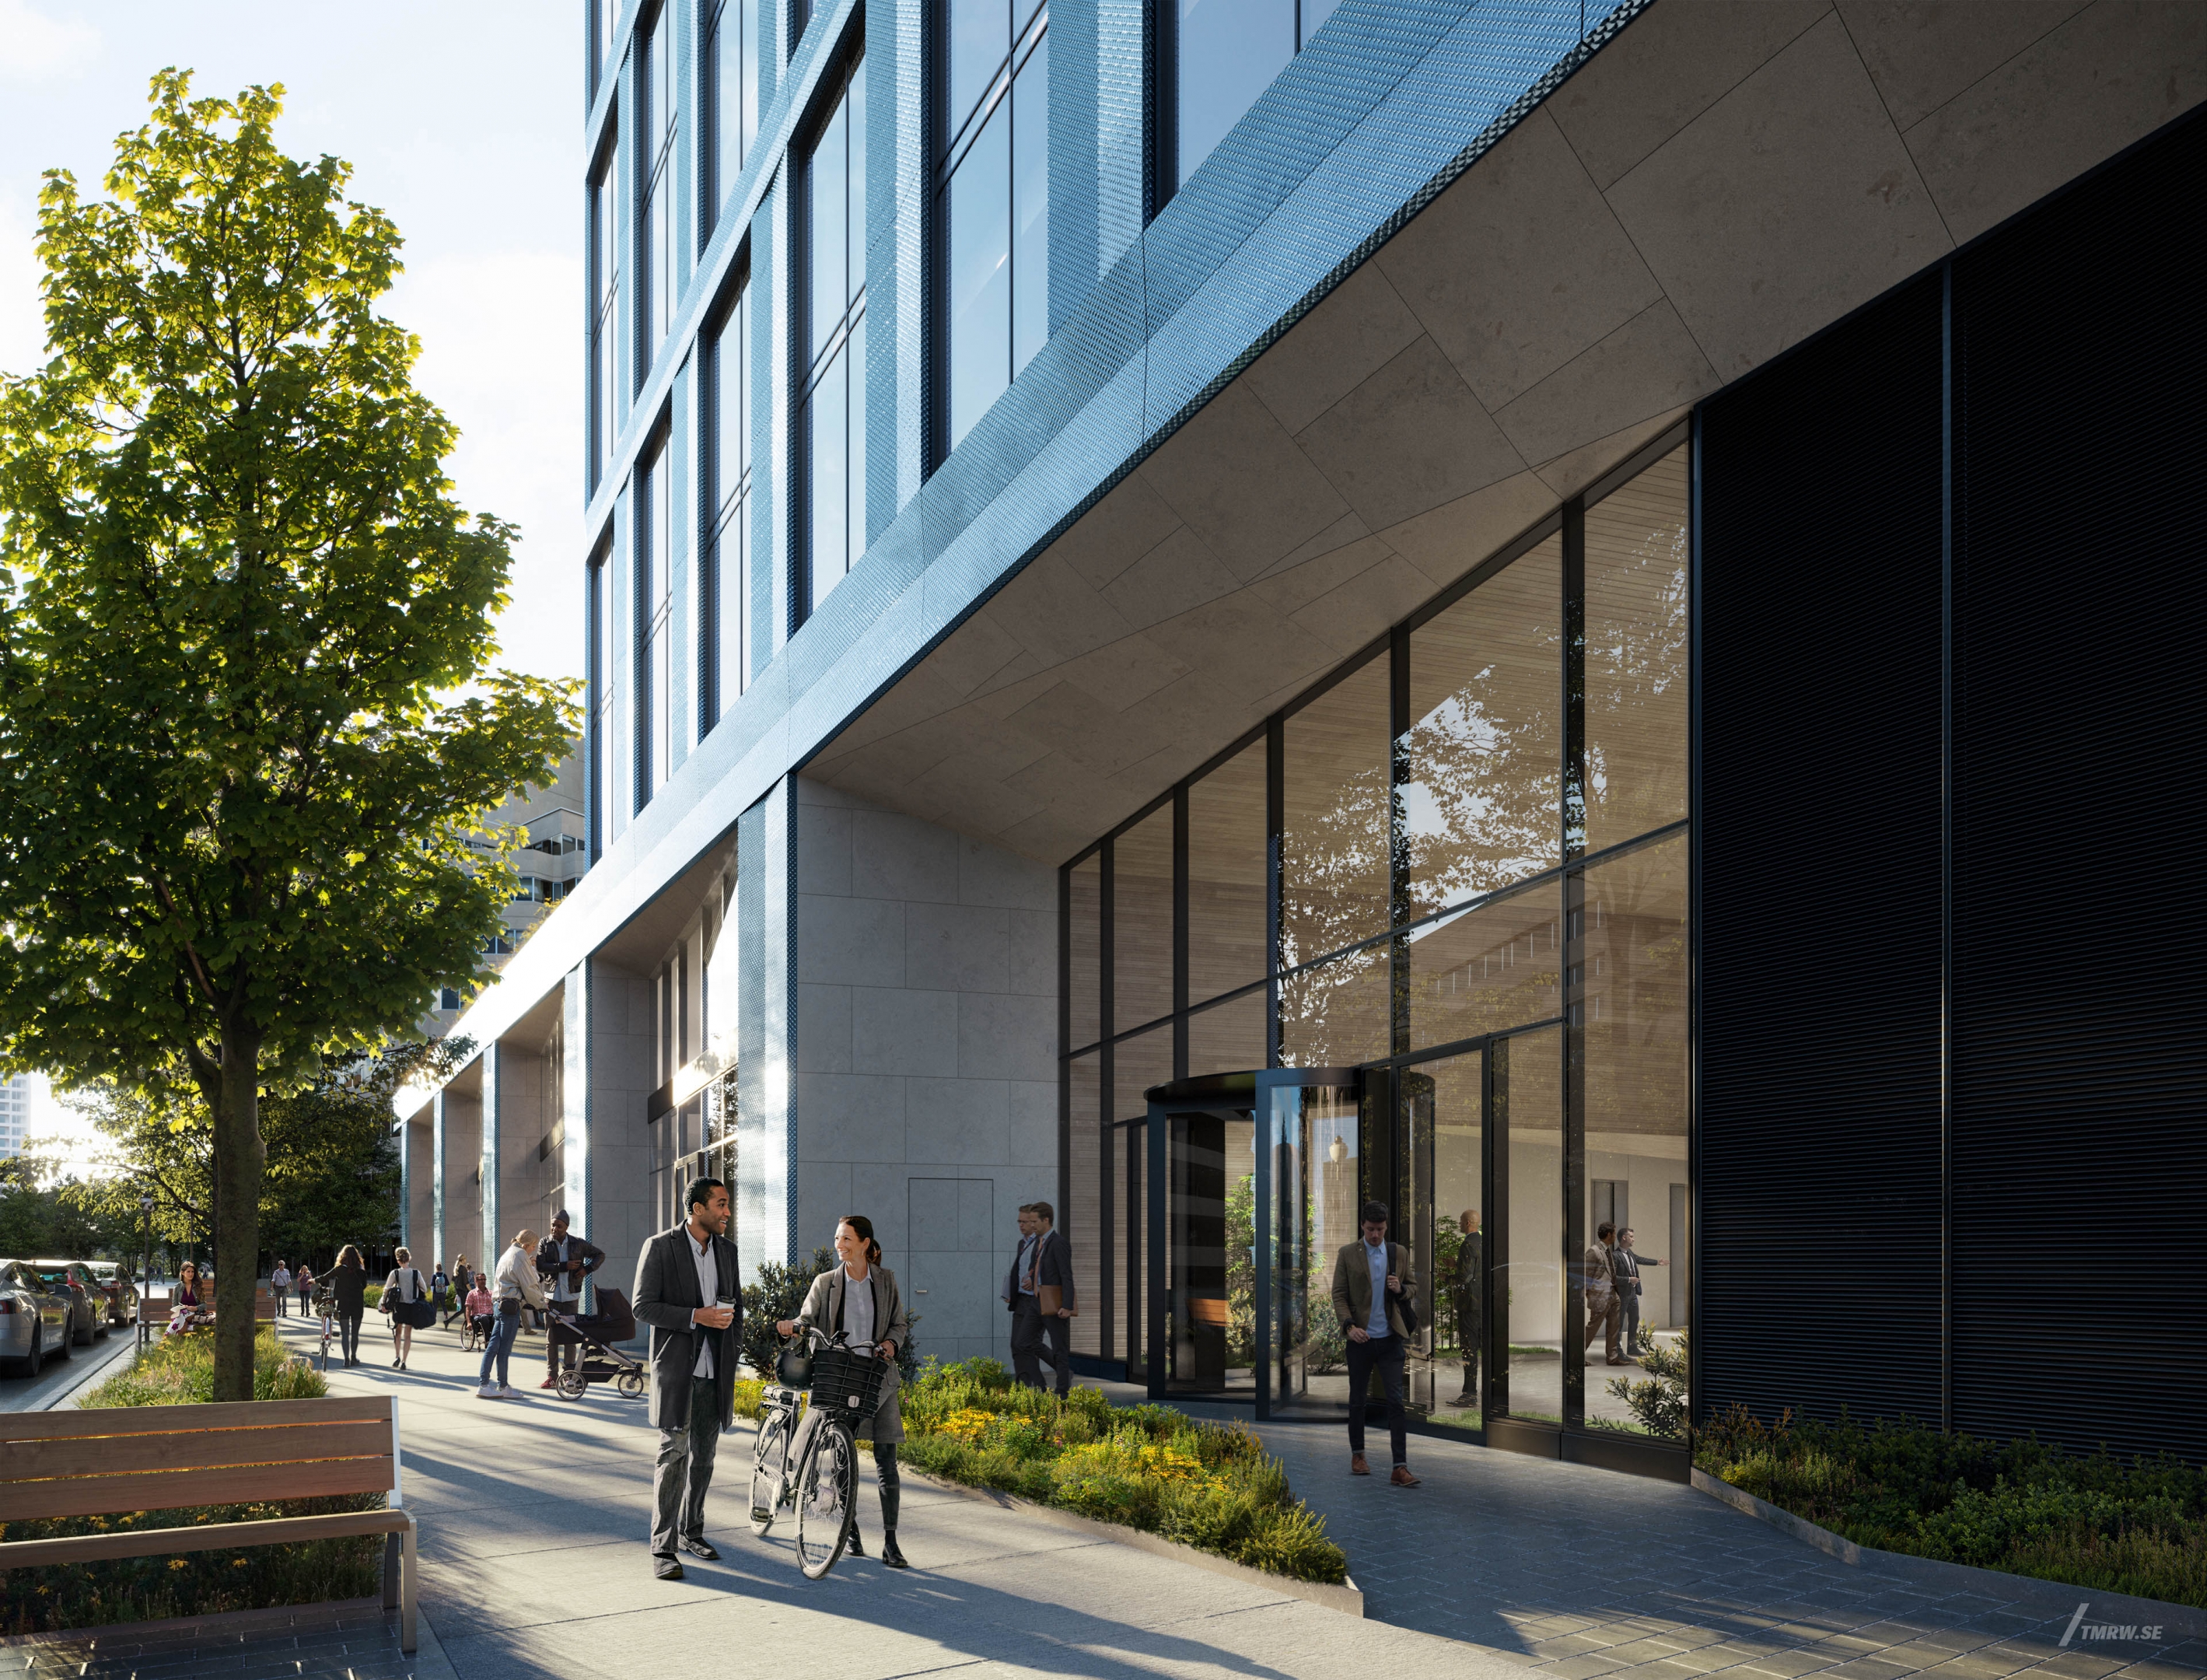 Architectural visualization of 101 12th Street for Studios, an office building in day light from a street view.